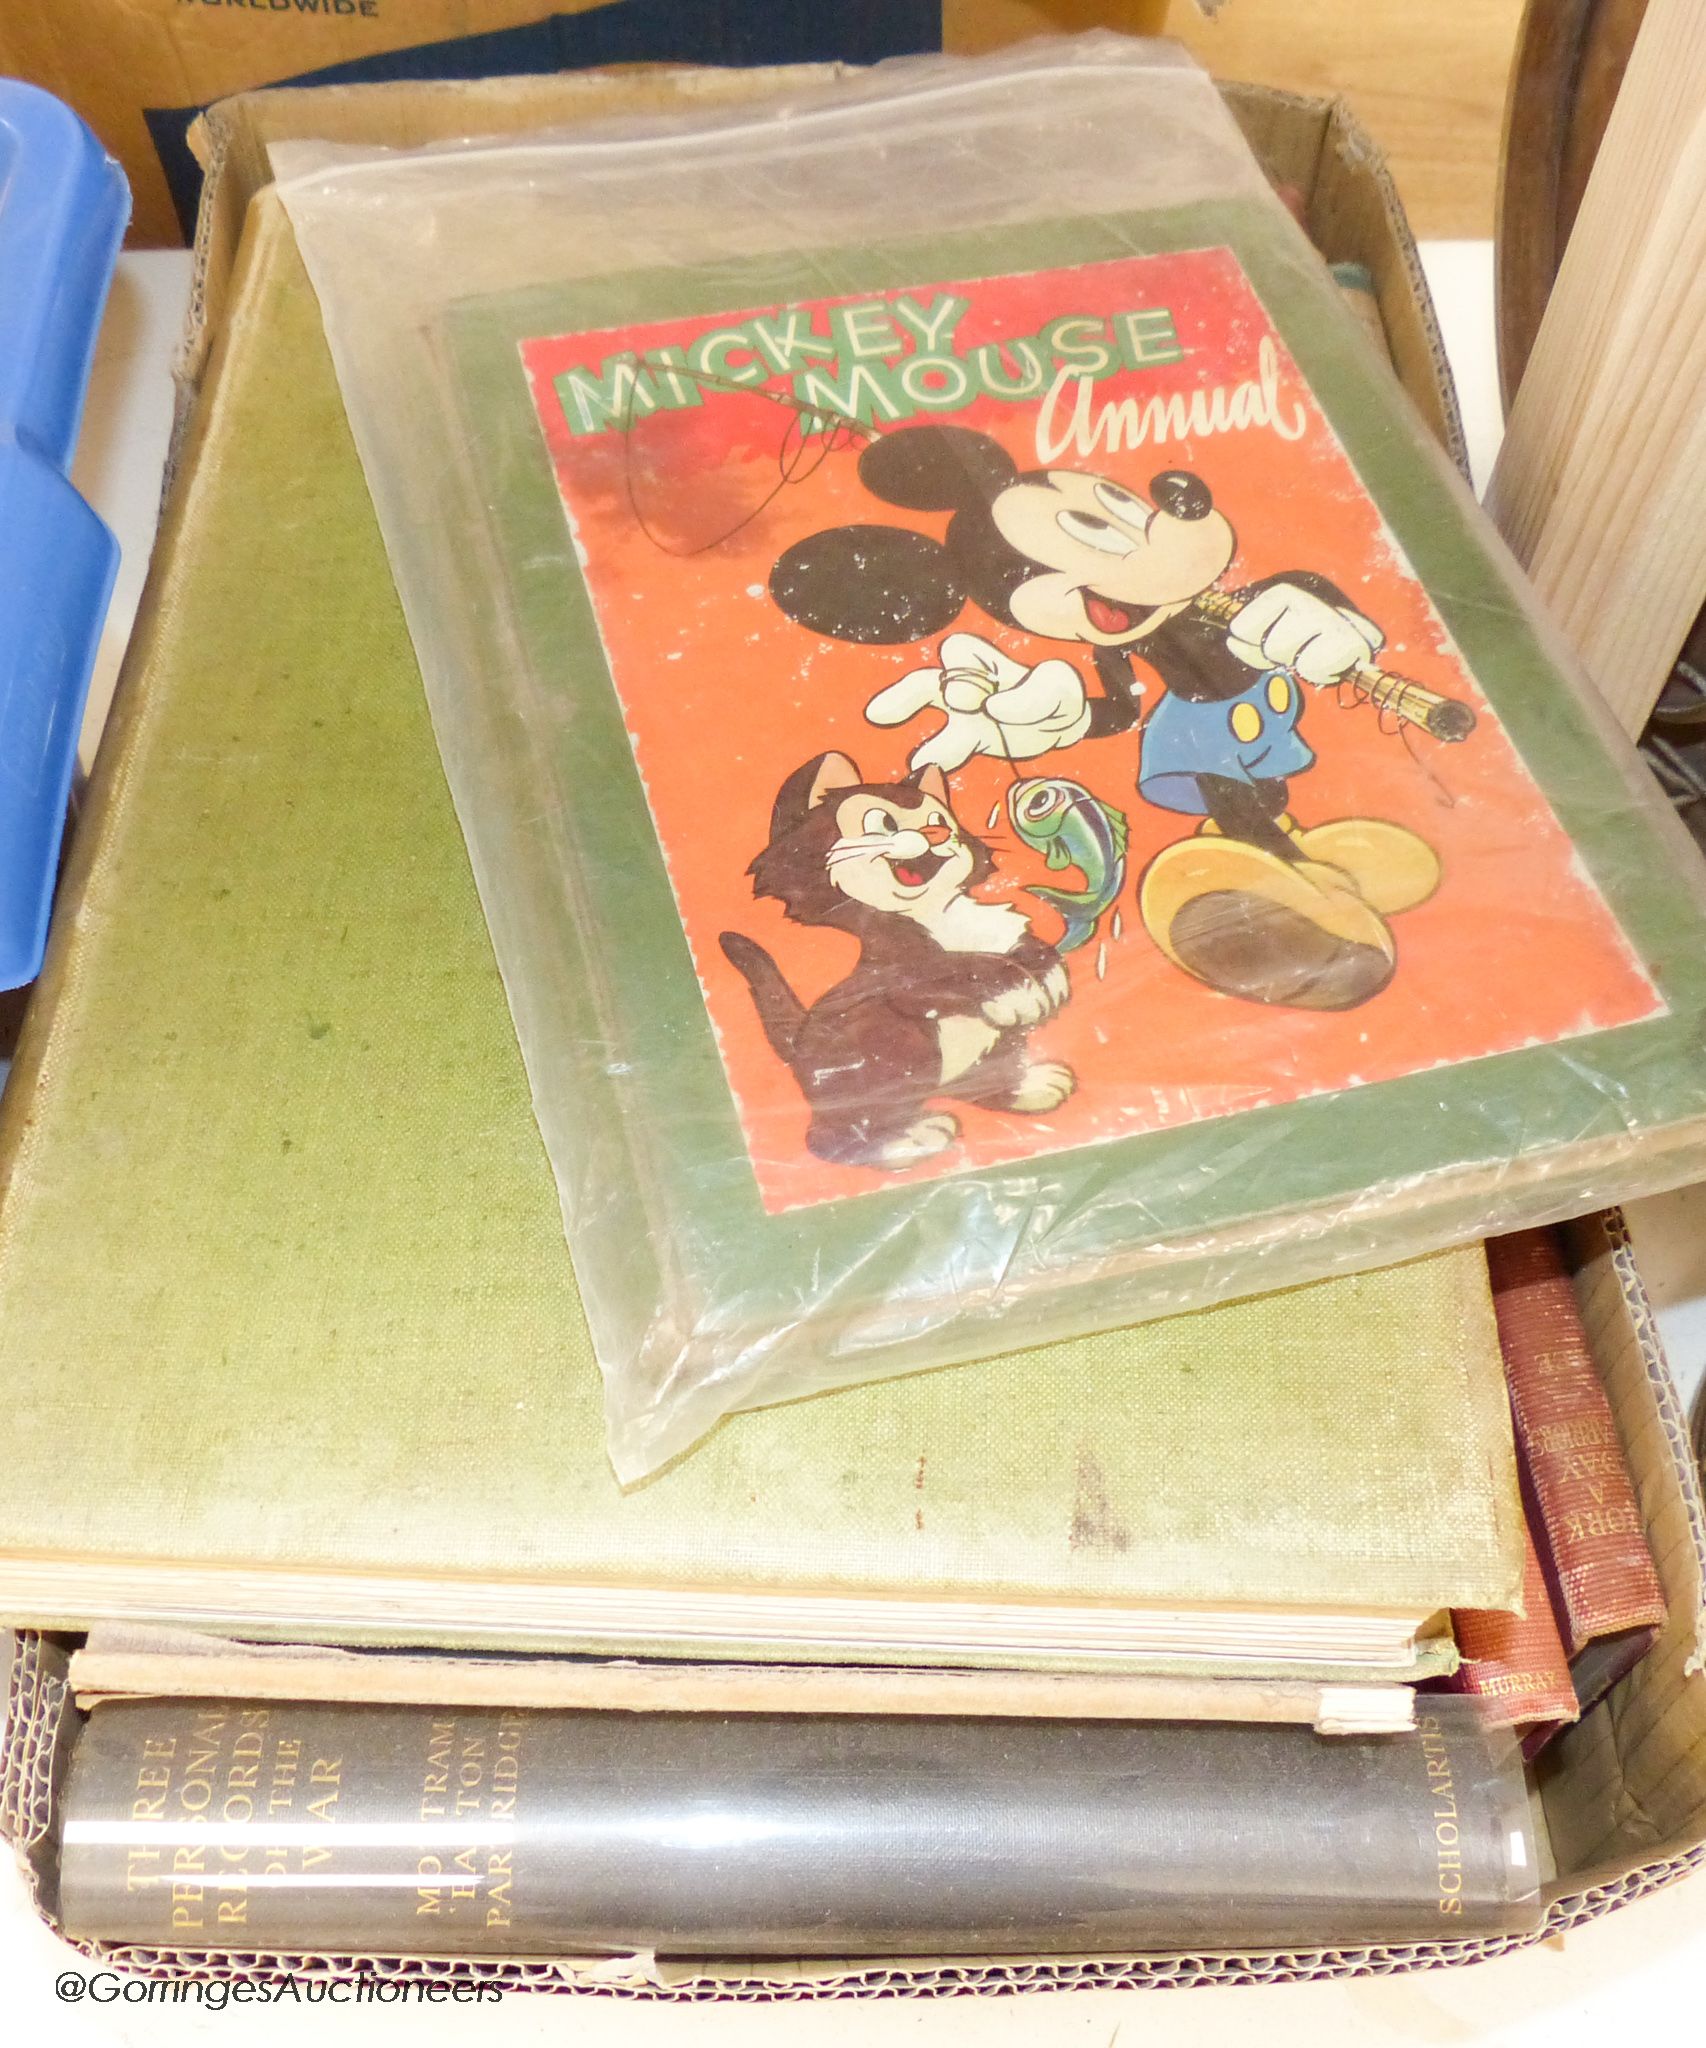 A collection of books, Maggs Bros catalogue and a Mickey Mouse book